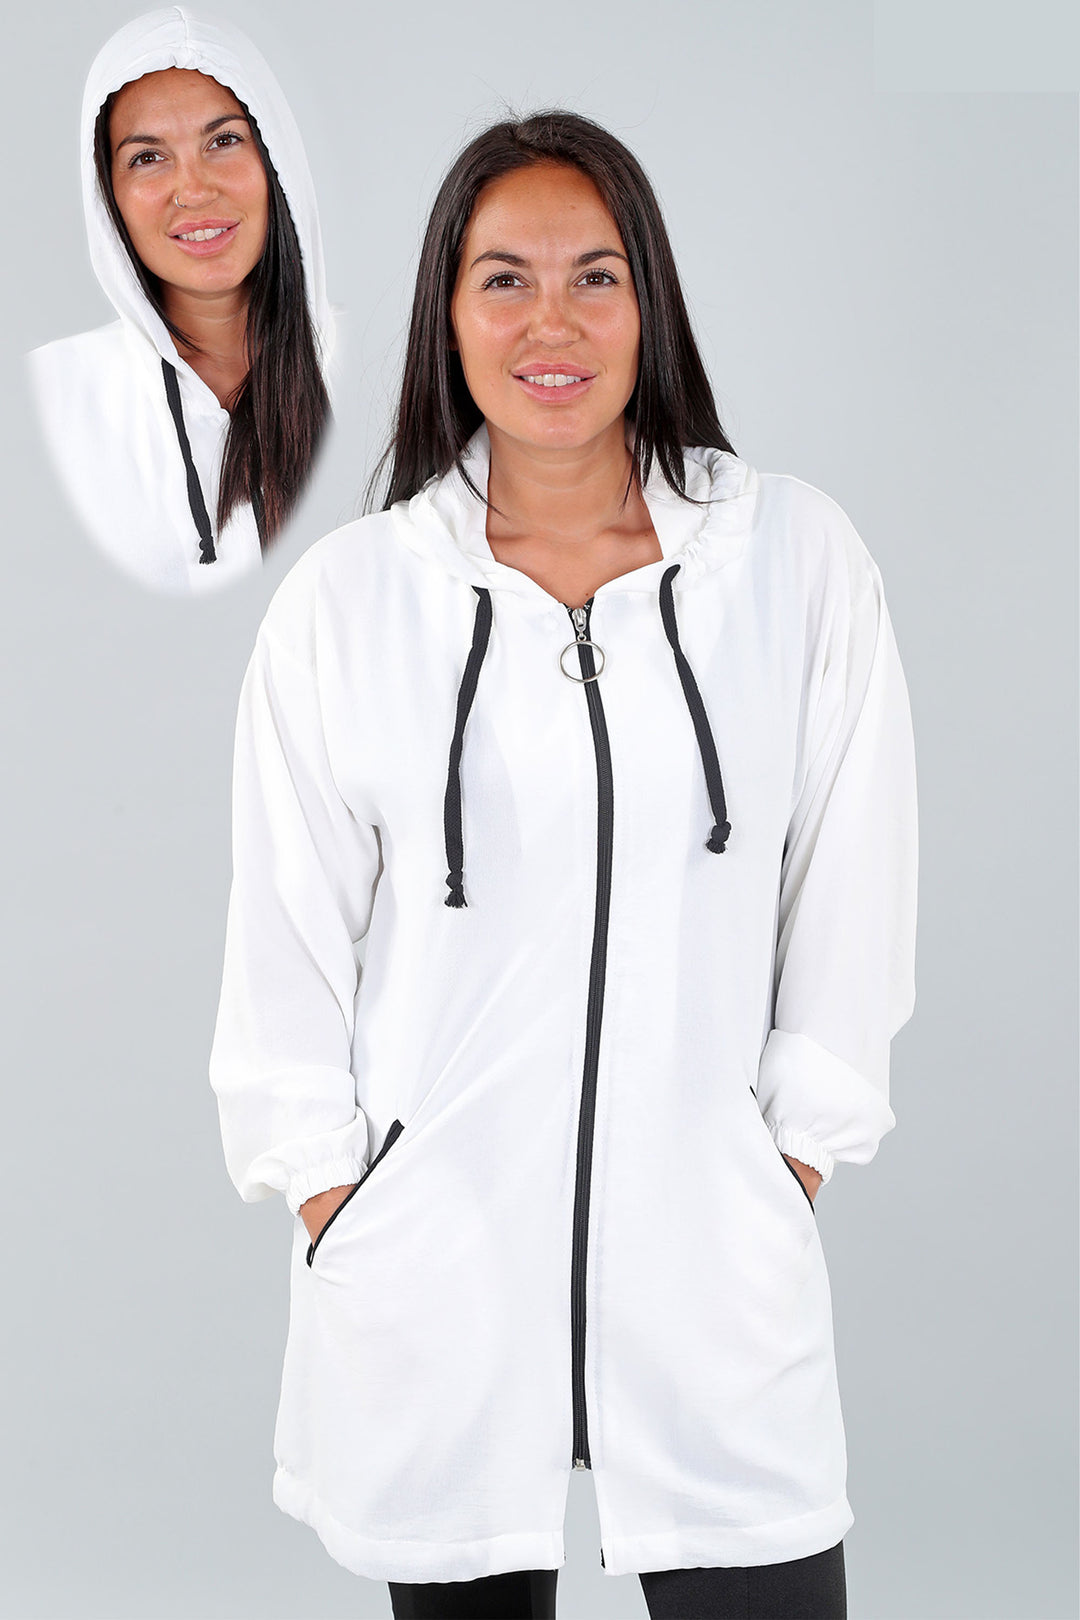 Crafted from lightweight material, this jacket features a drawstring hood, convenient side pockets and a front zipper.